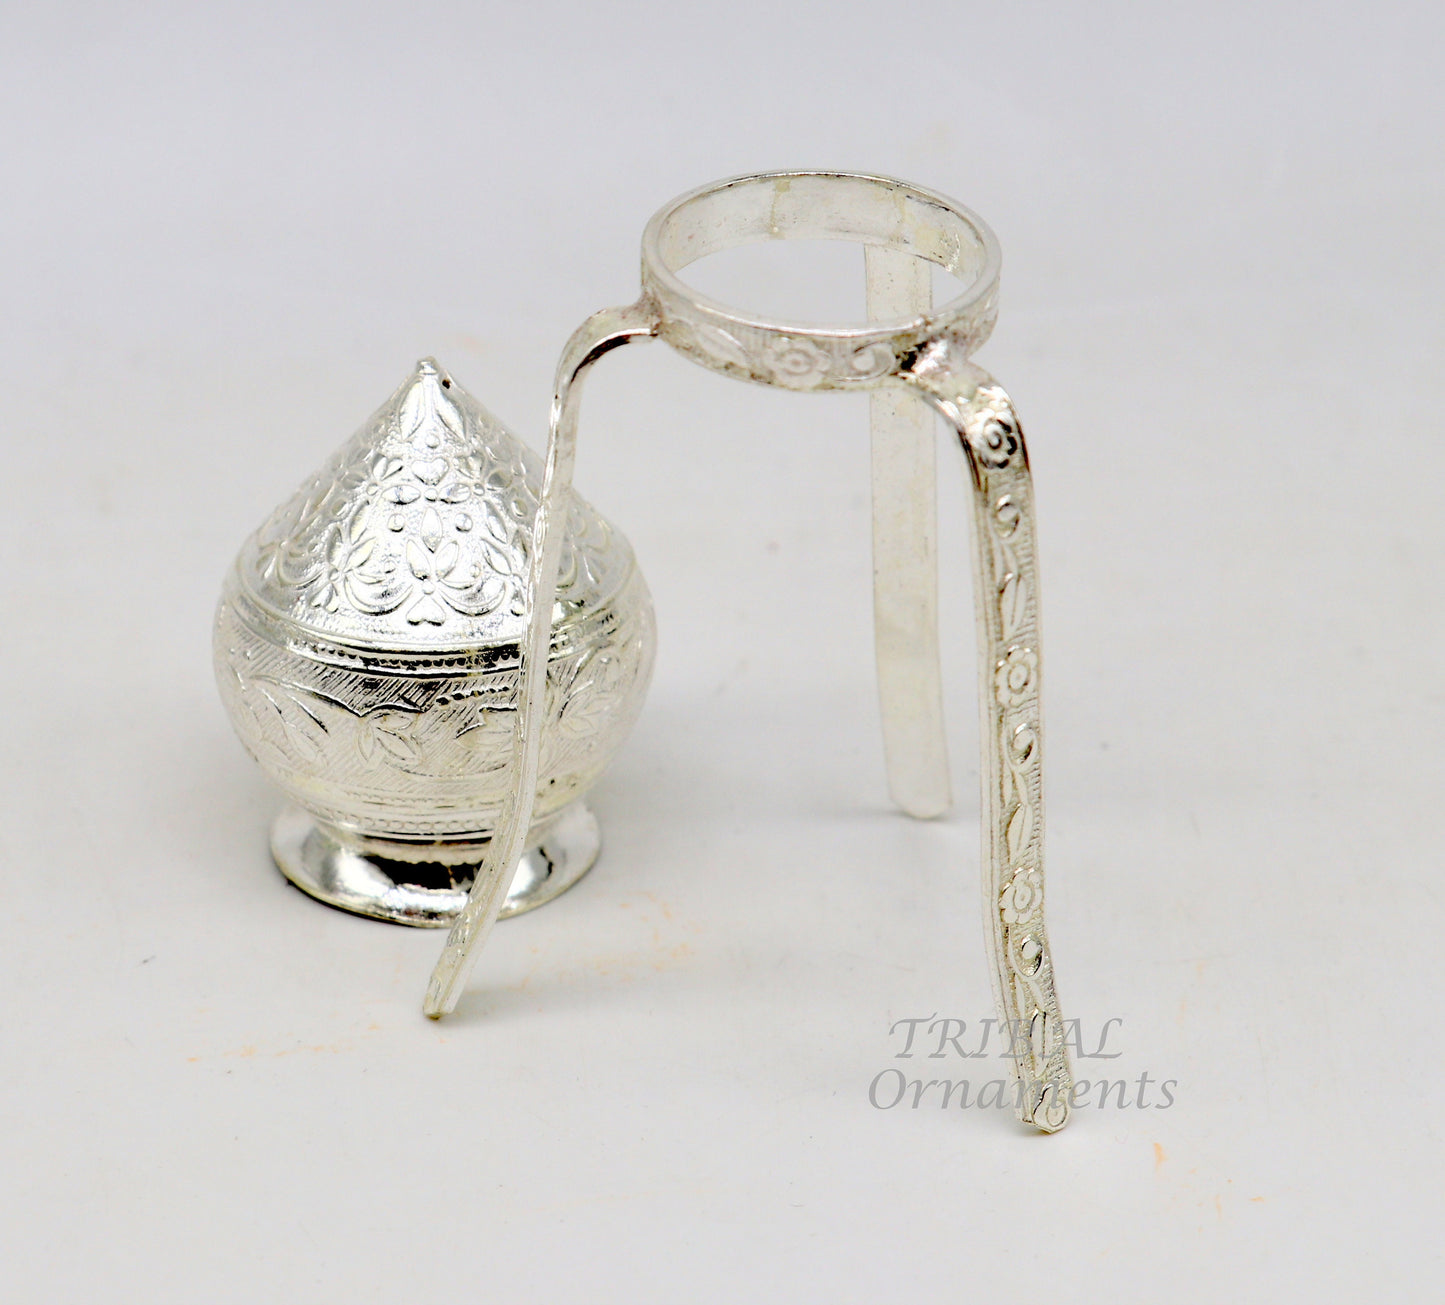 925 sterling silver handmade God shiva lingam water flow pot or puja kalas for Abhishek of lingam, best worshipping article from india su912 - TRIBAL ORNAMENTS